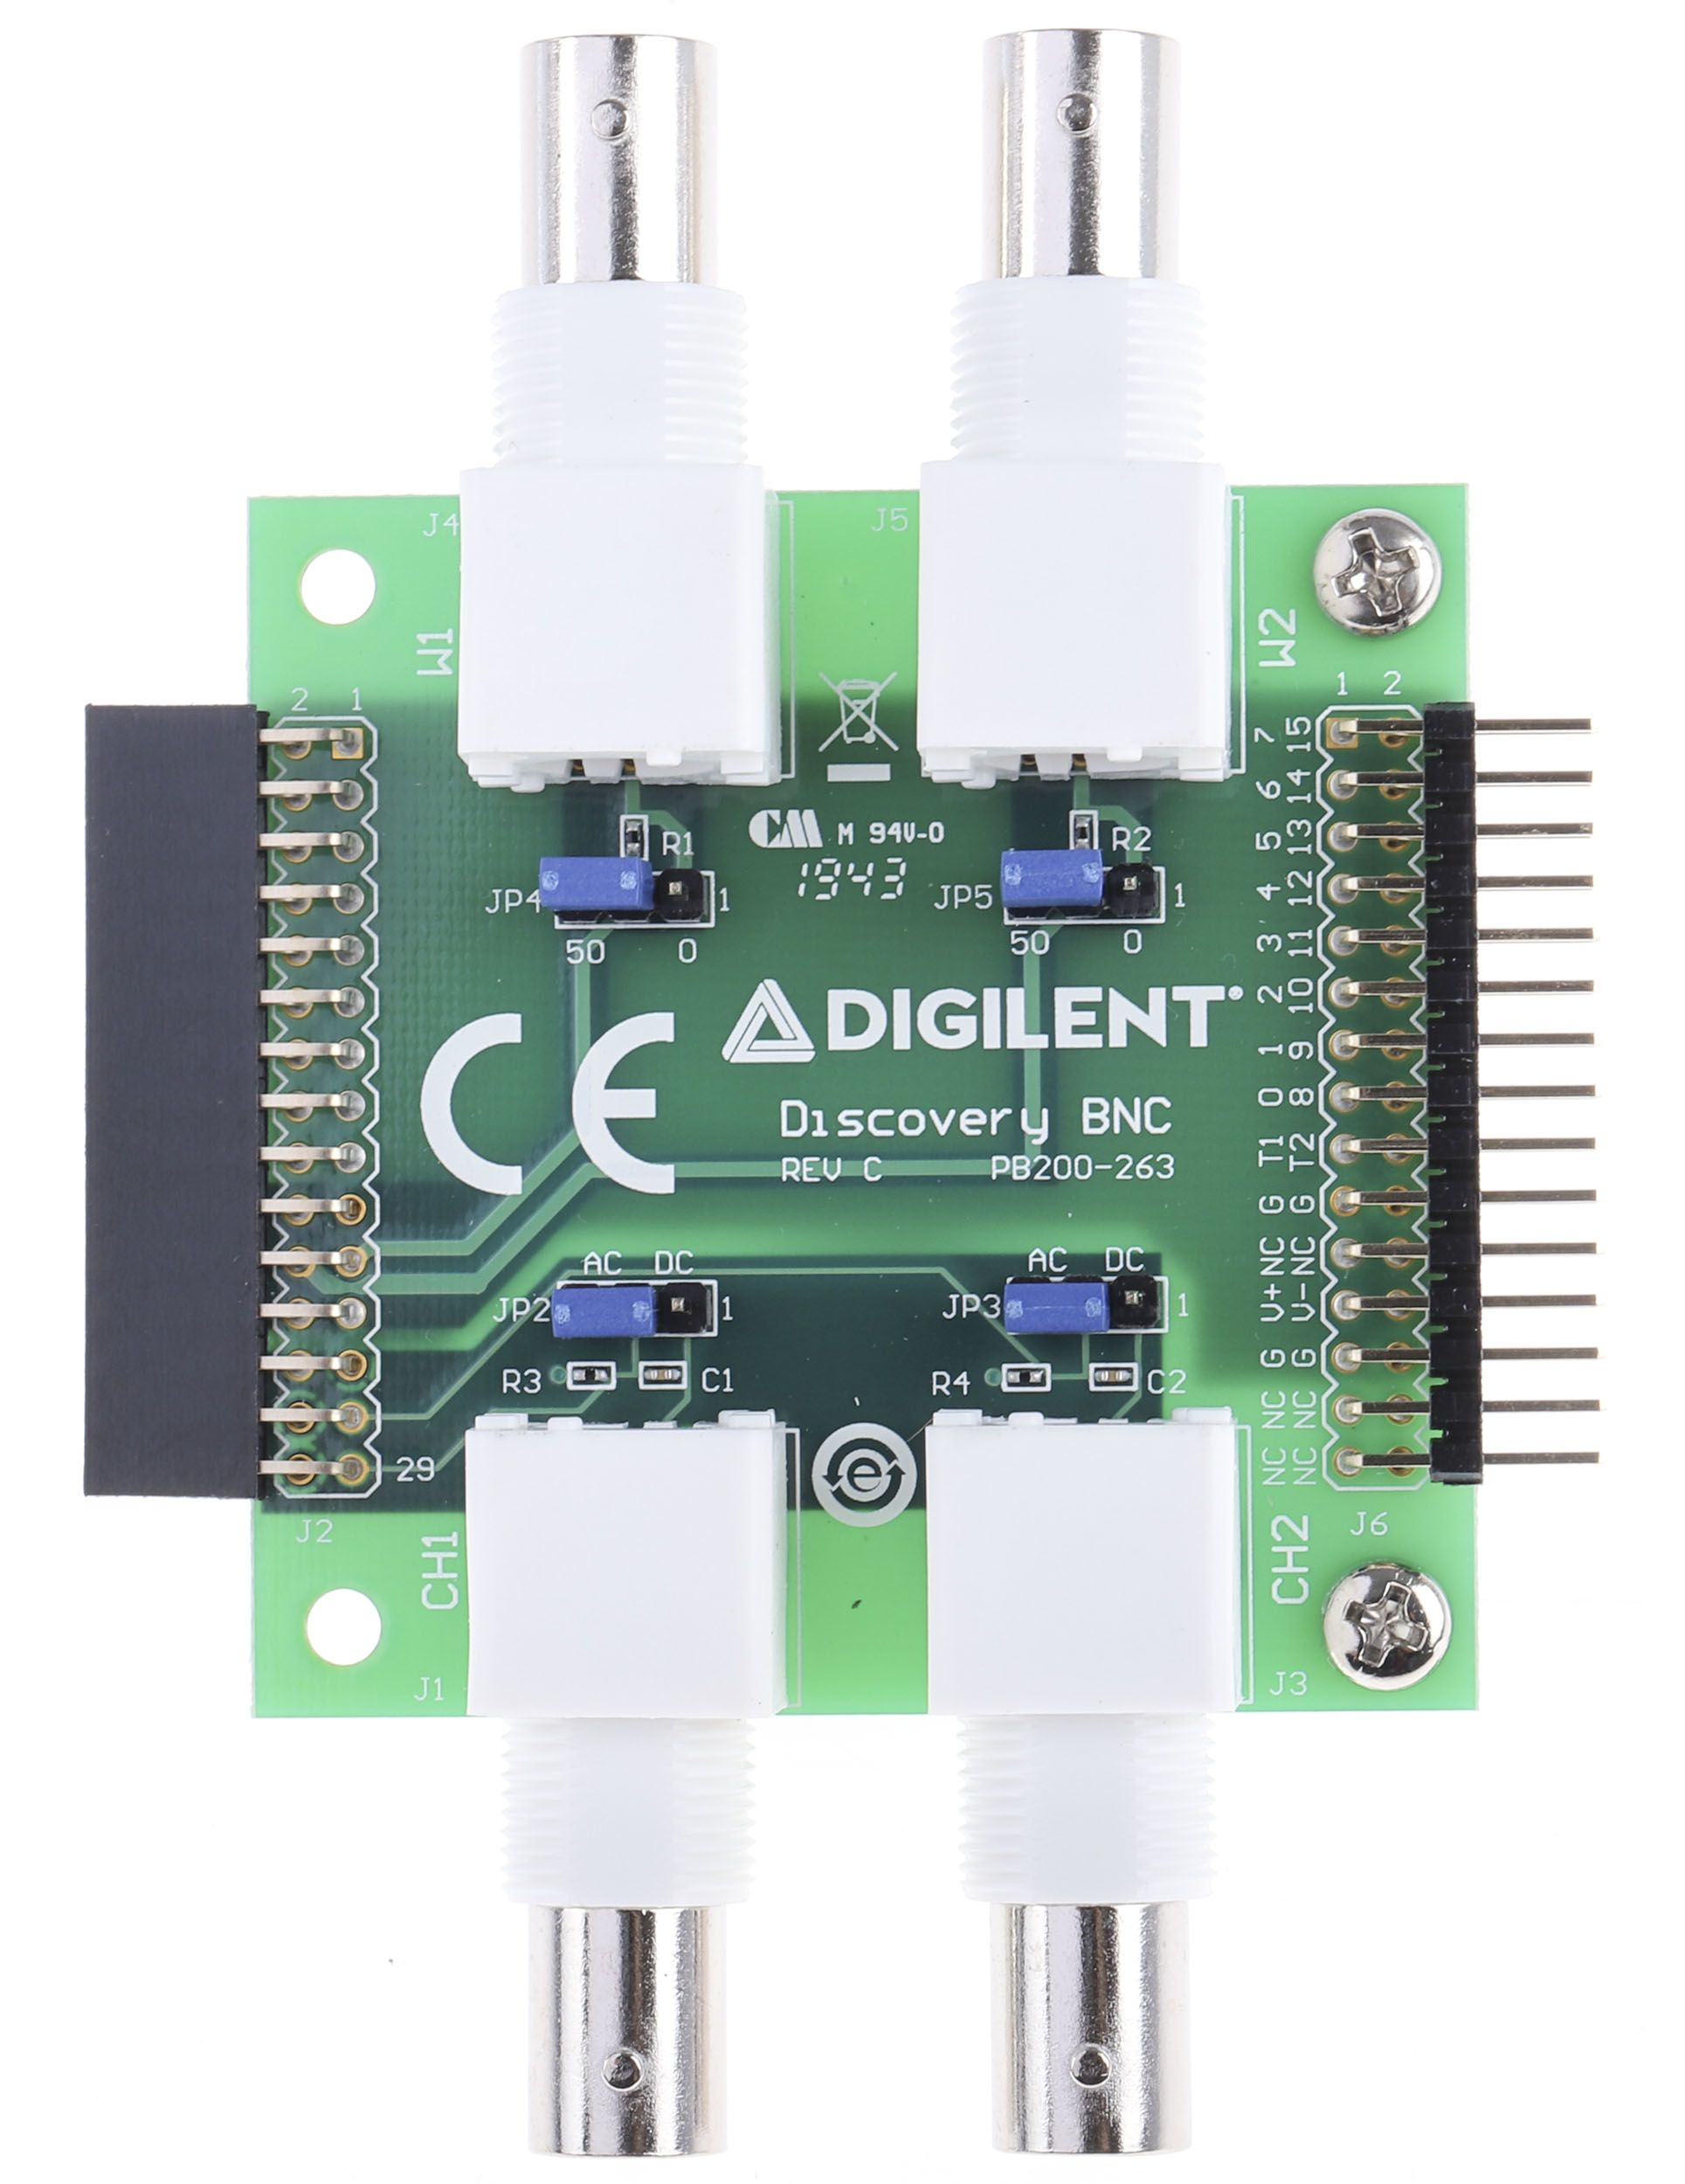 Digilent 410-263 Oscilloscope Adapter BNC Adapter Board for Use with Analog Discovery 2